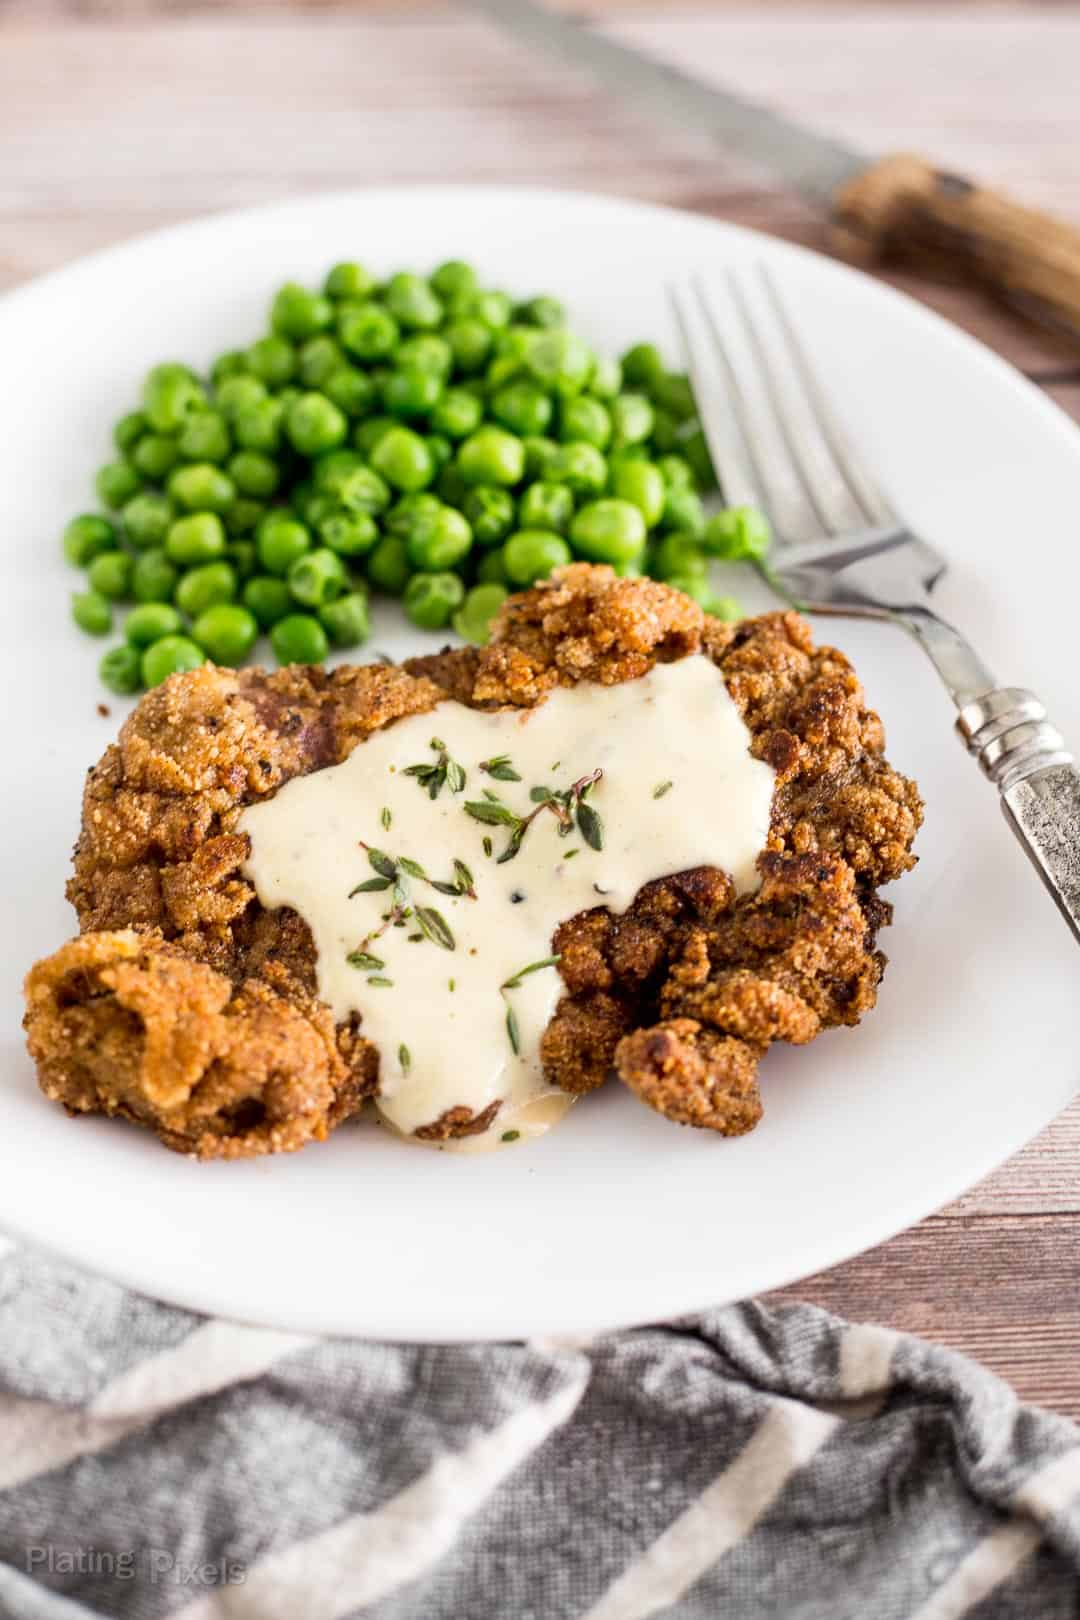 Keto Chicken Fried Steak on a plate served with green peas